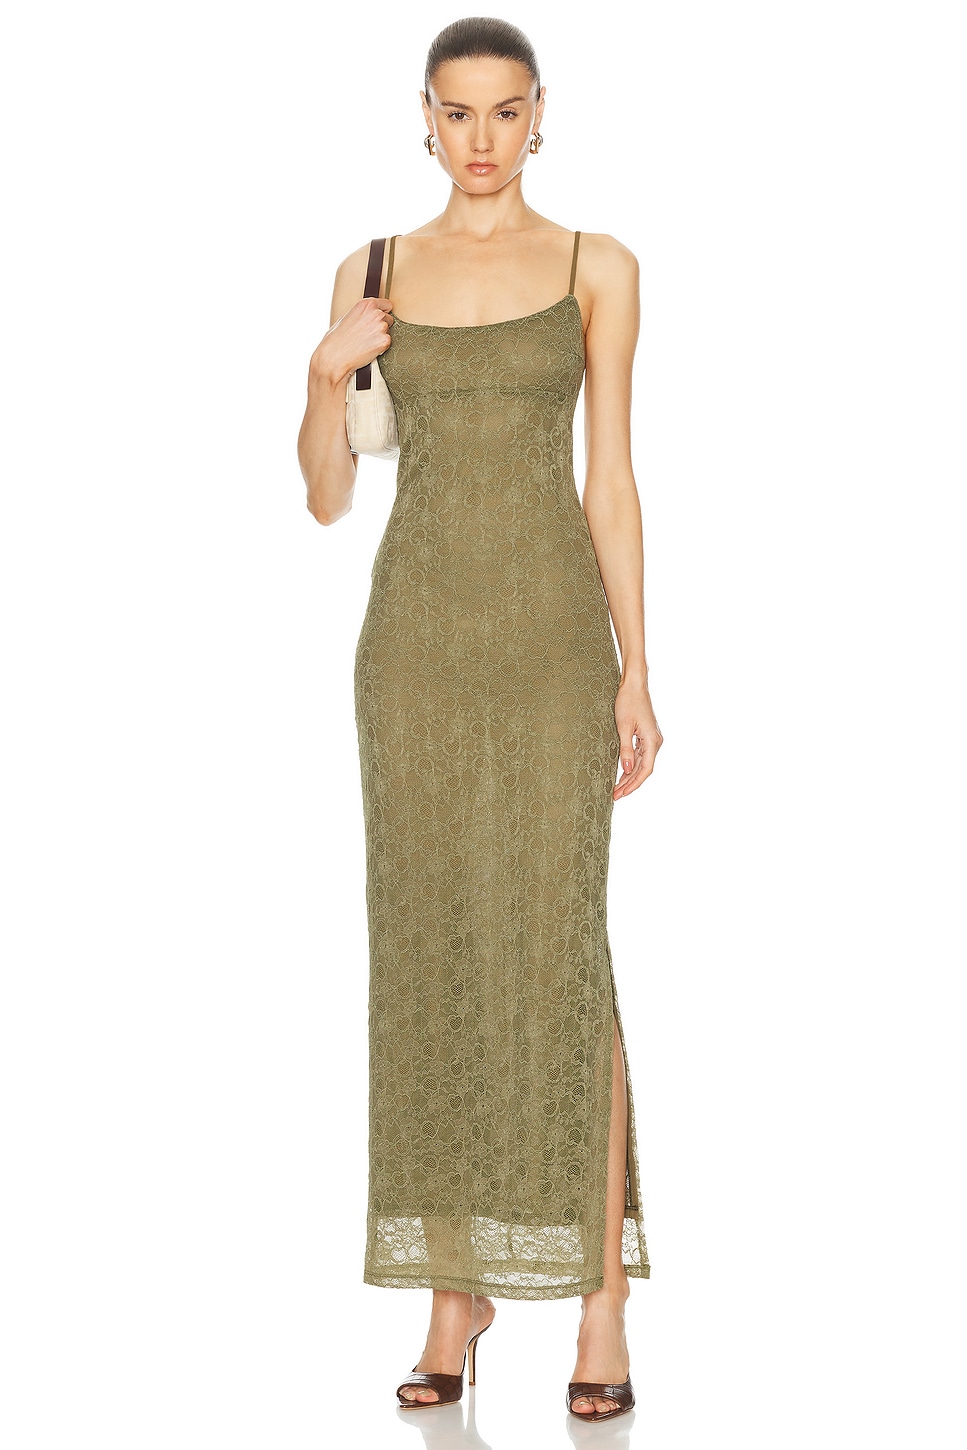 Thais Dress in Olive